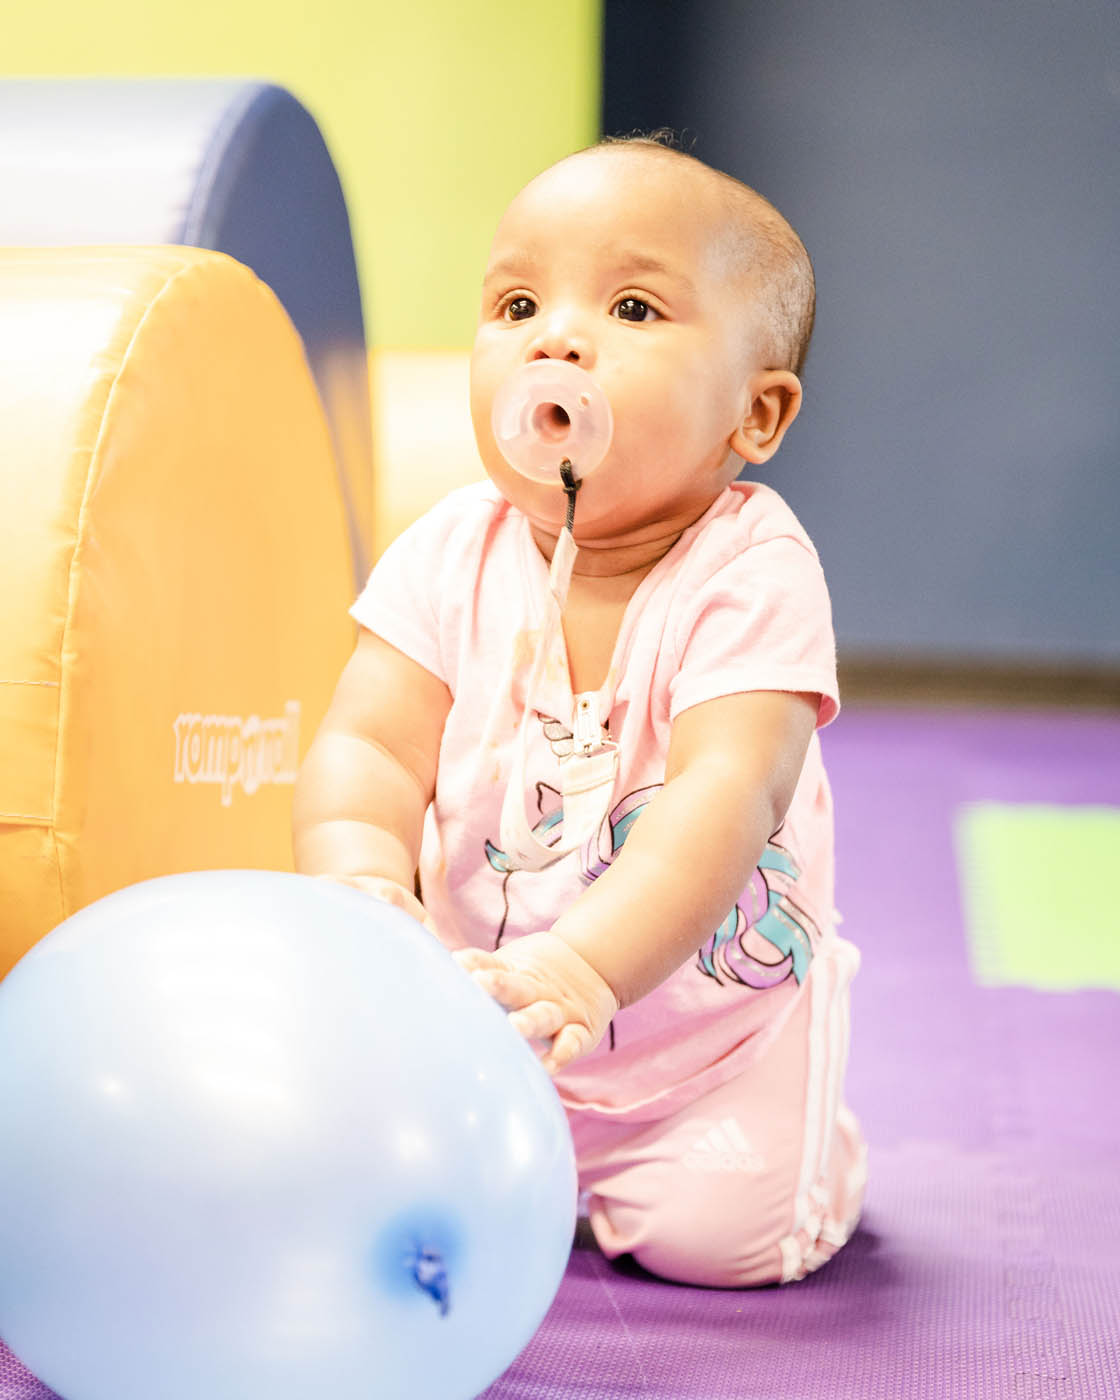 A baby in a gym class working on basic motor skills and enjoying playing with a blue ball - Romp n' Roll.